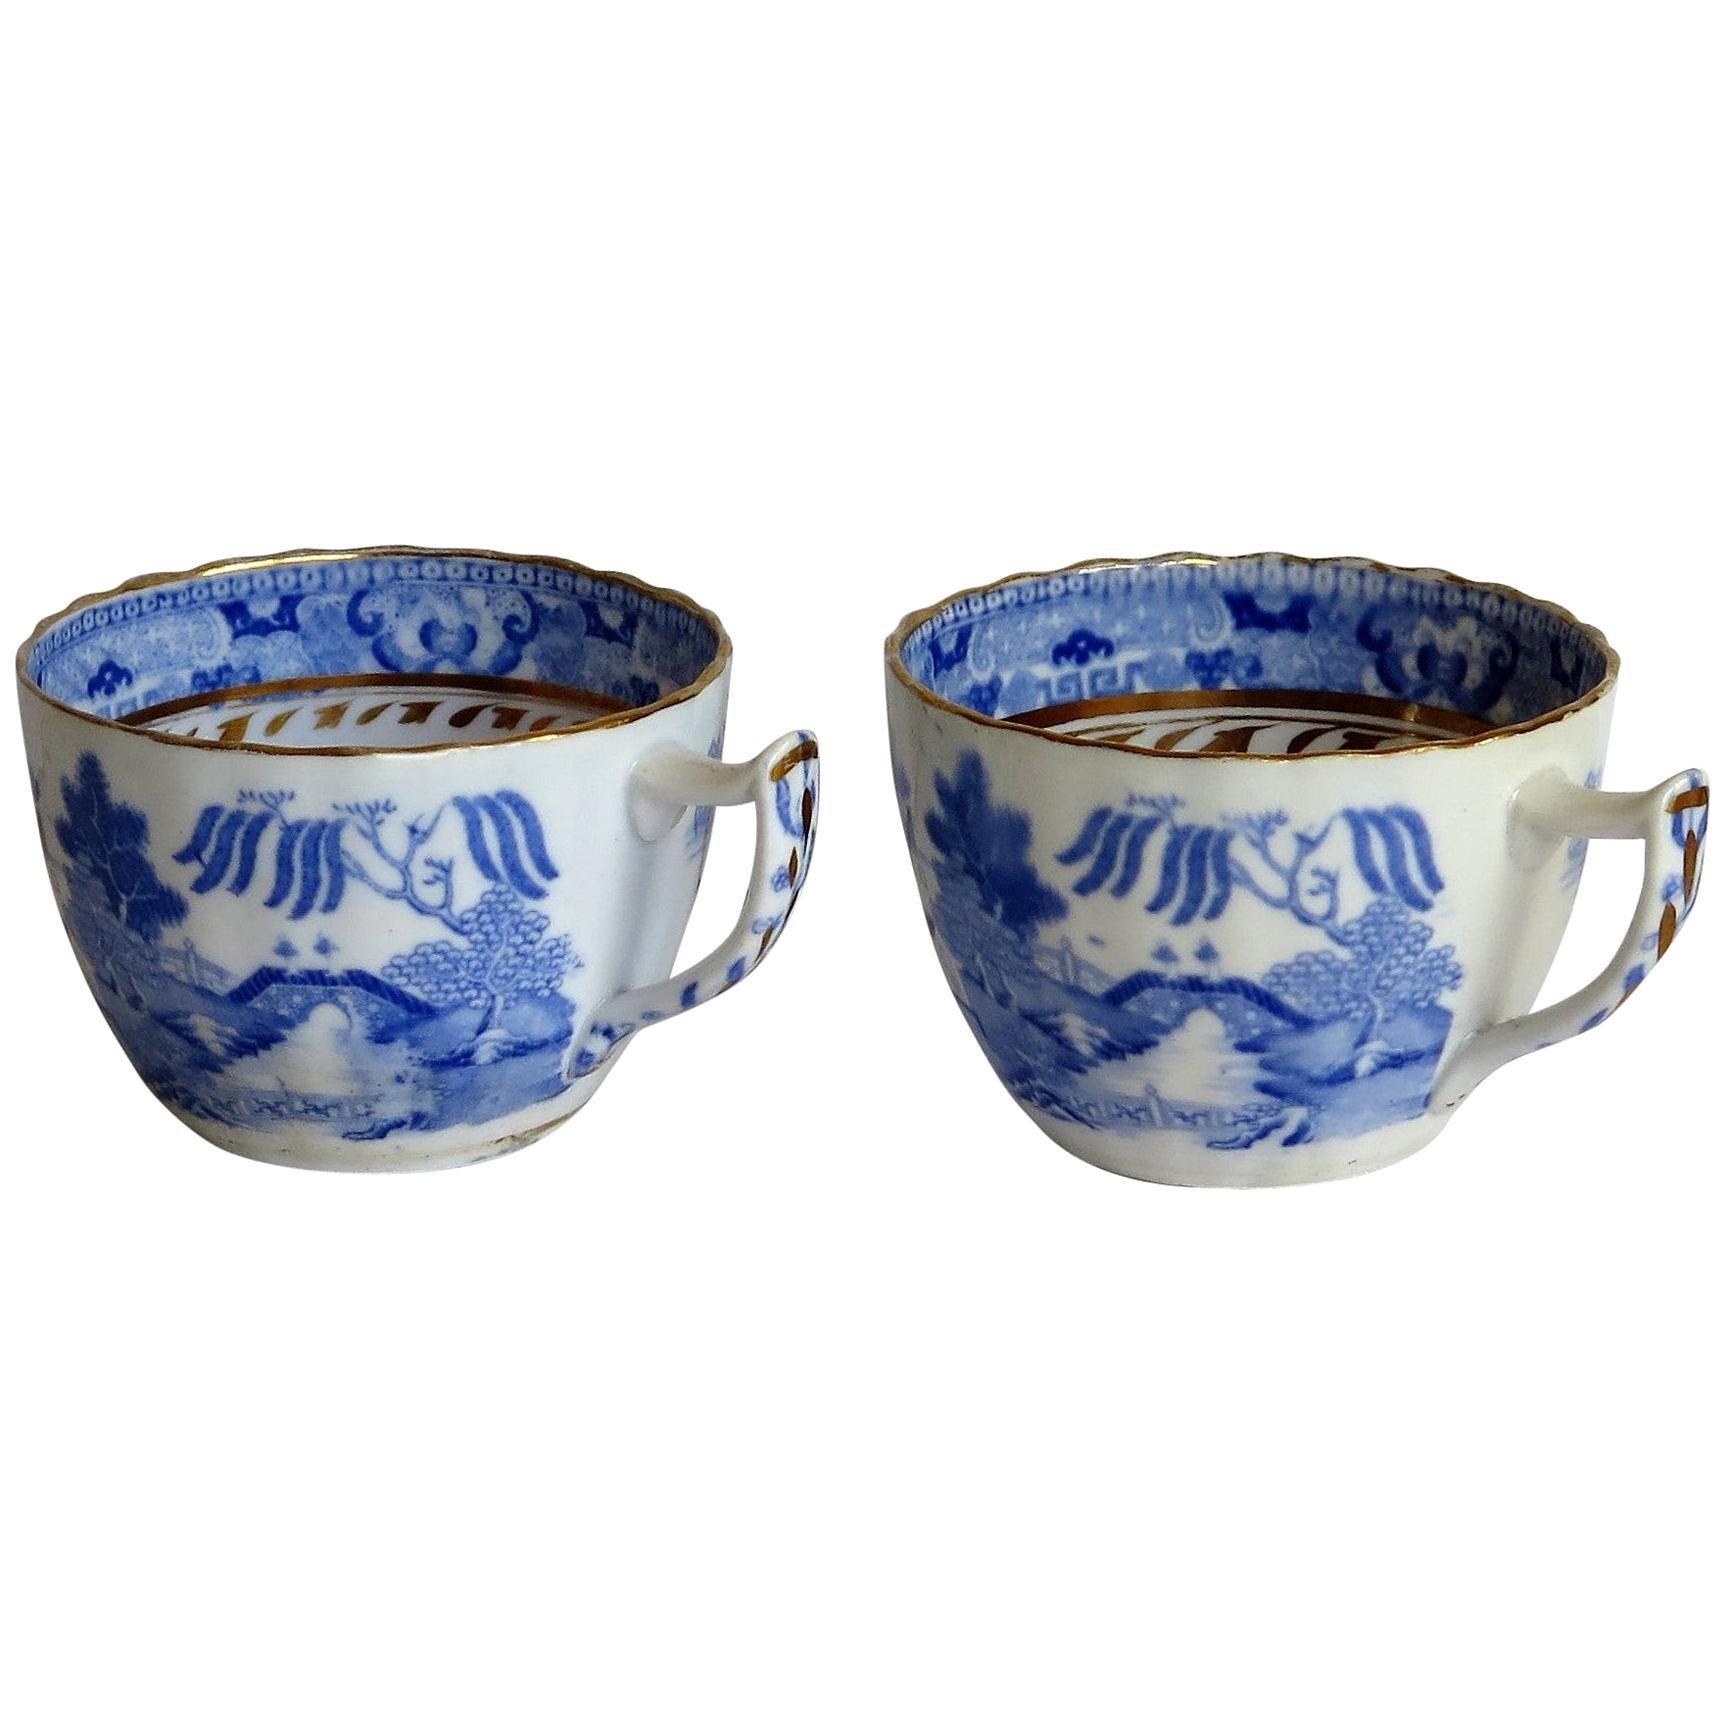 Miles Mason Porcelain Pair of Tea Cups Broseley Blue and White Pattern, Ca. 1805